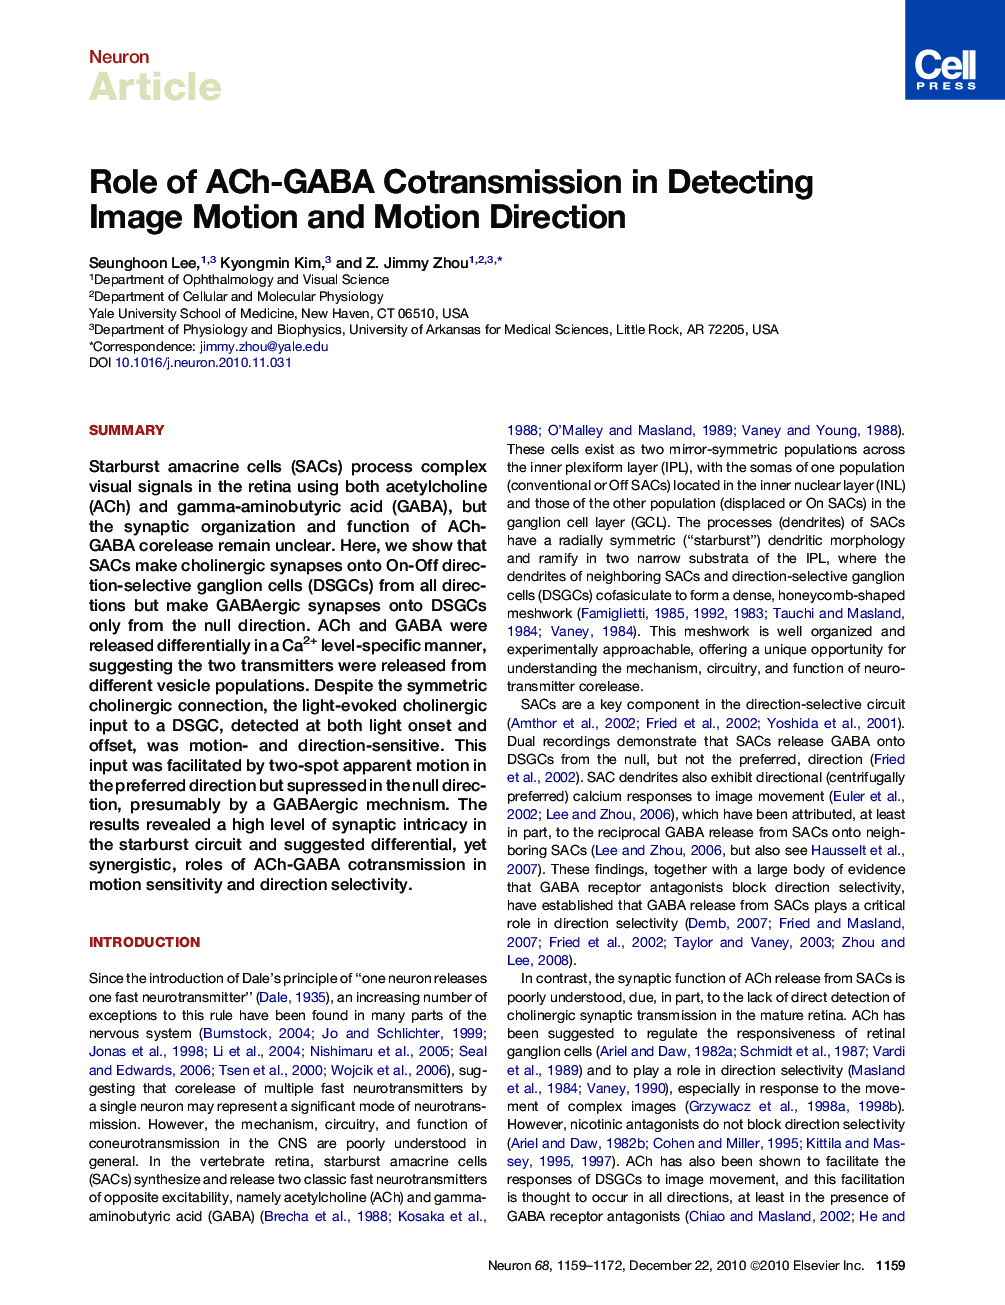 Role of ACh-GABA Cotransmission in Detecting Image Motion and Motion Direction